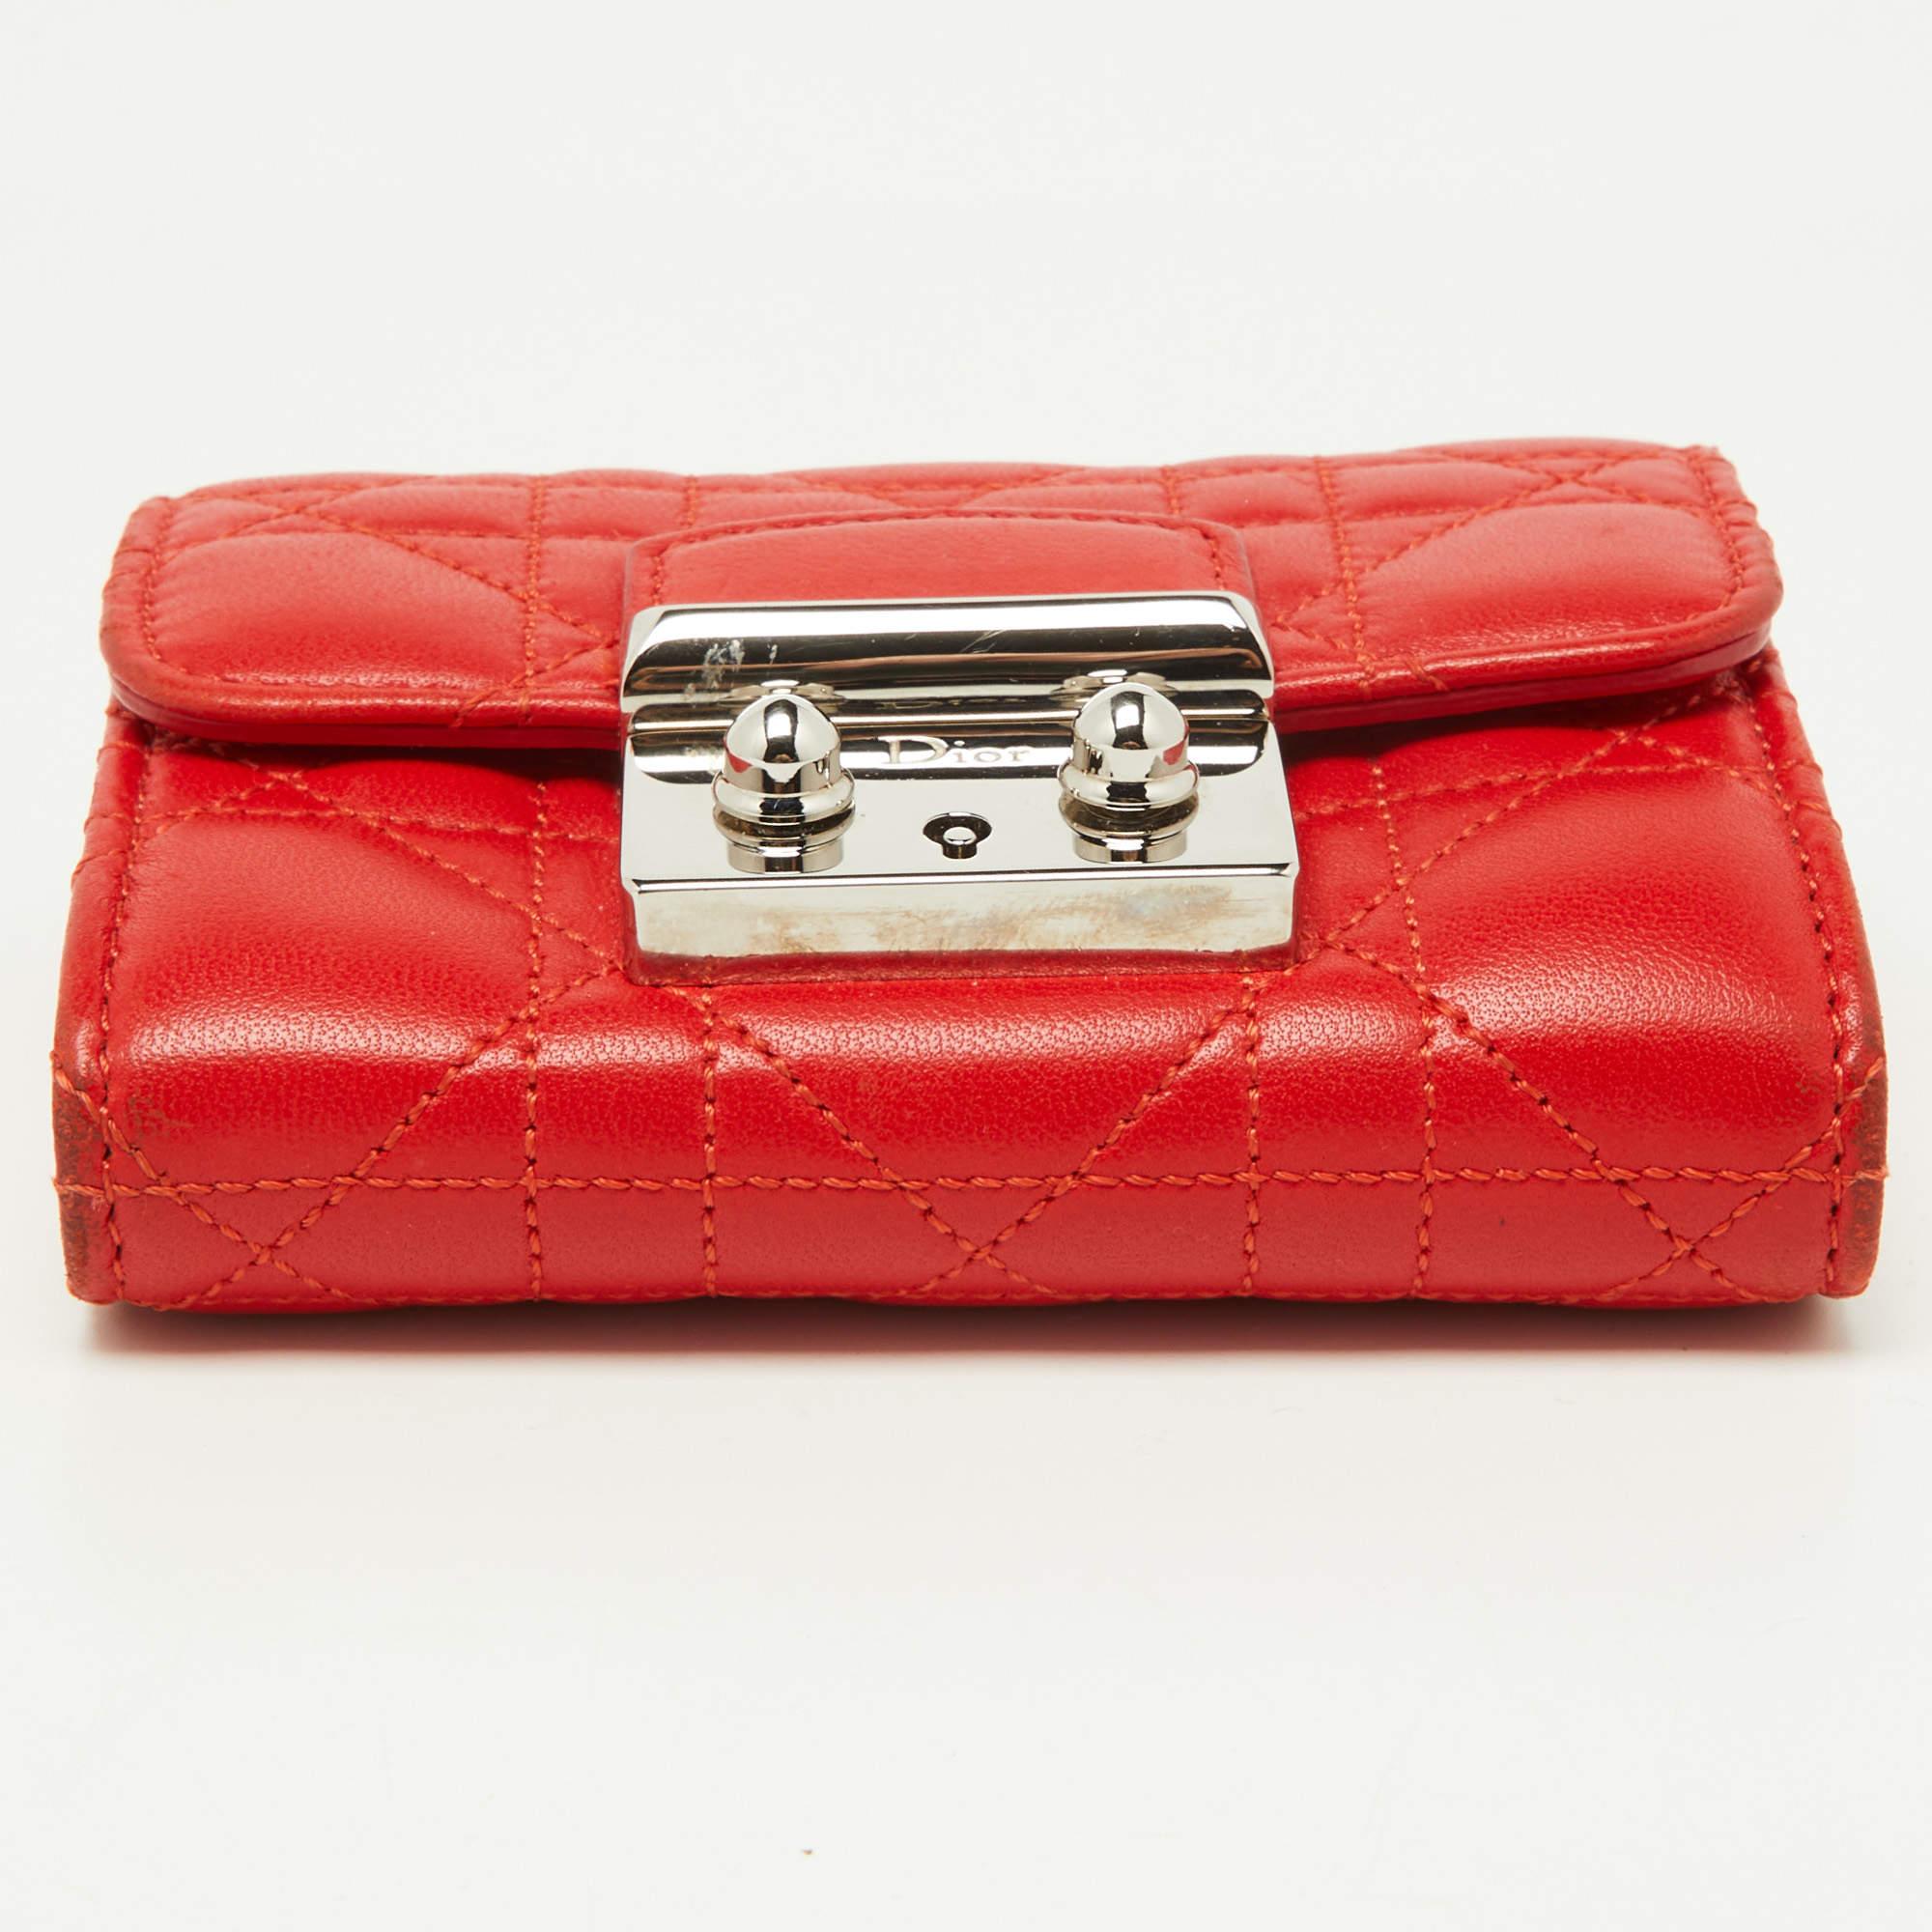 Dior Red Cannage Leather Miss Dior Compact Wallet In Good Condition For Sale In Dubai, Al Qouz 2